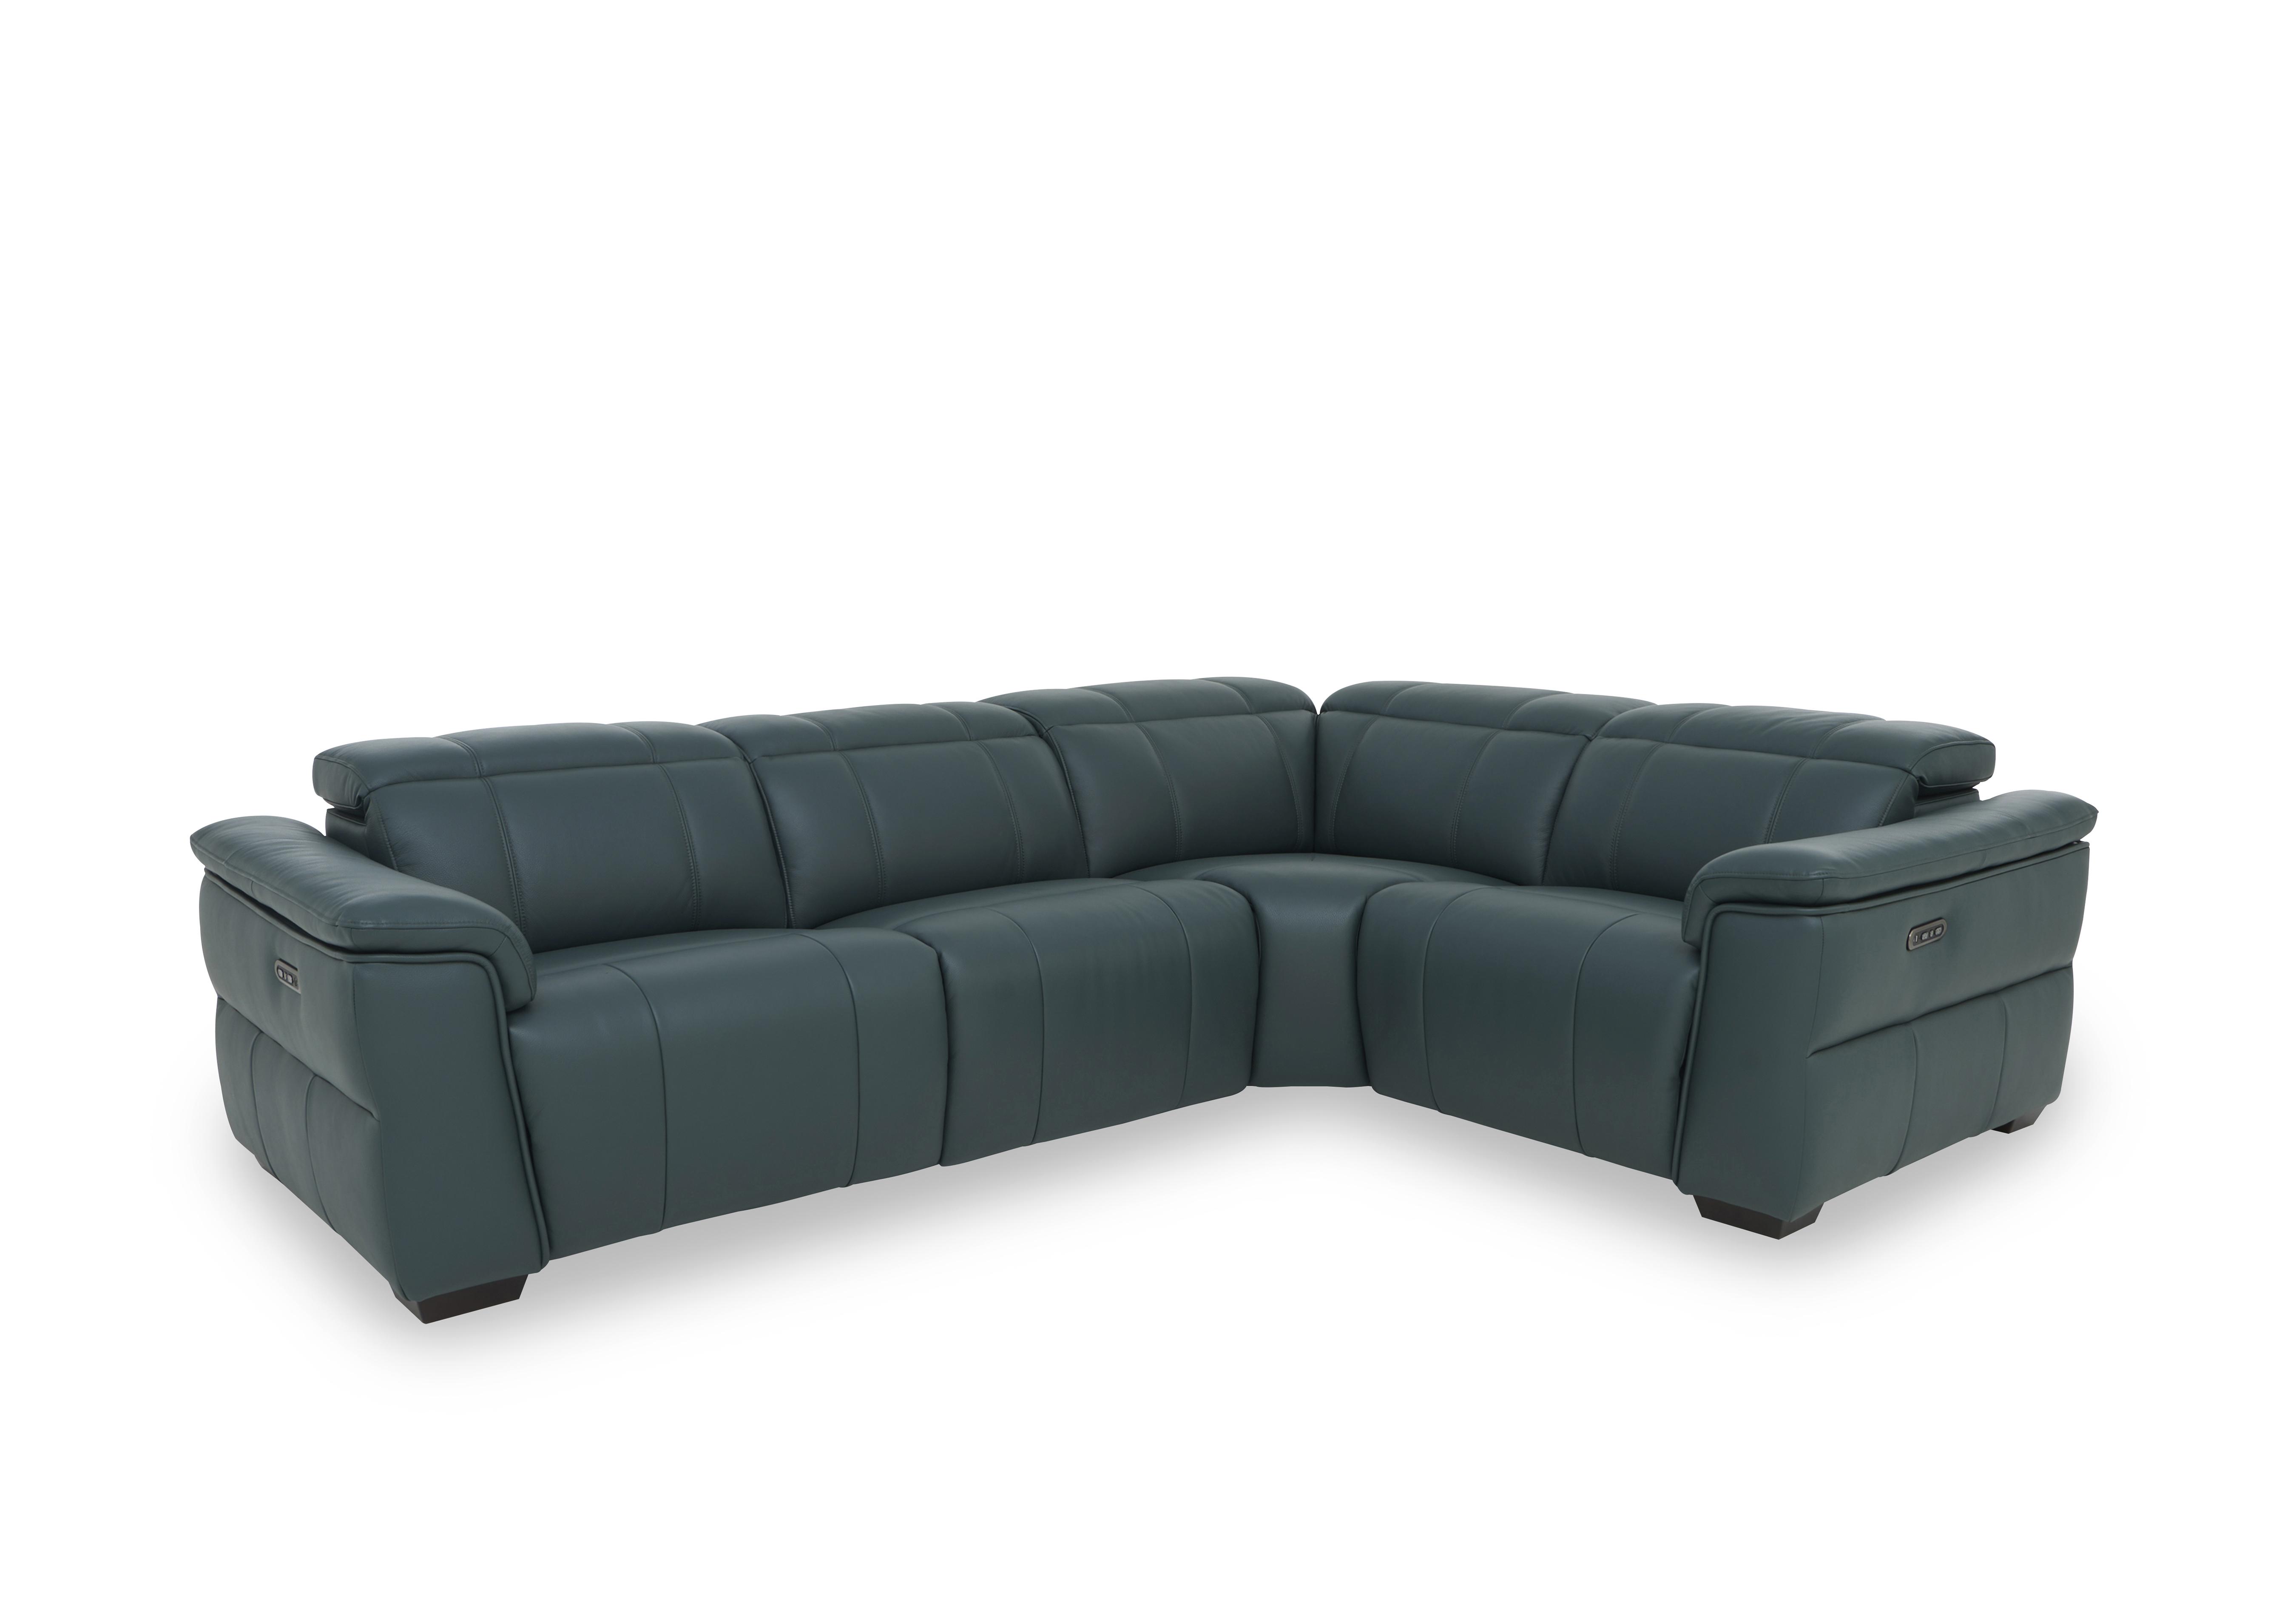 Inca Leather Double Power Recliner Corner Sofa with Power Headrests in Cat-40/09 Peacock on Furniture Village